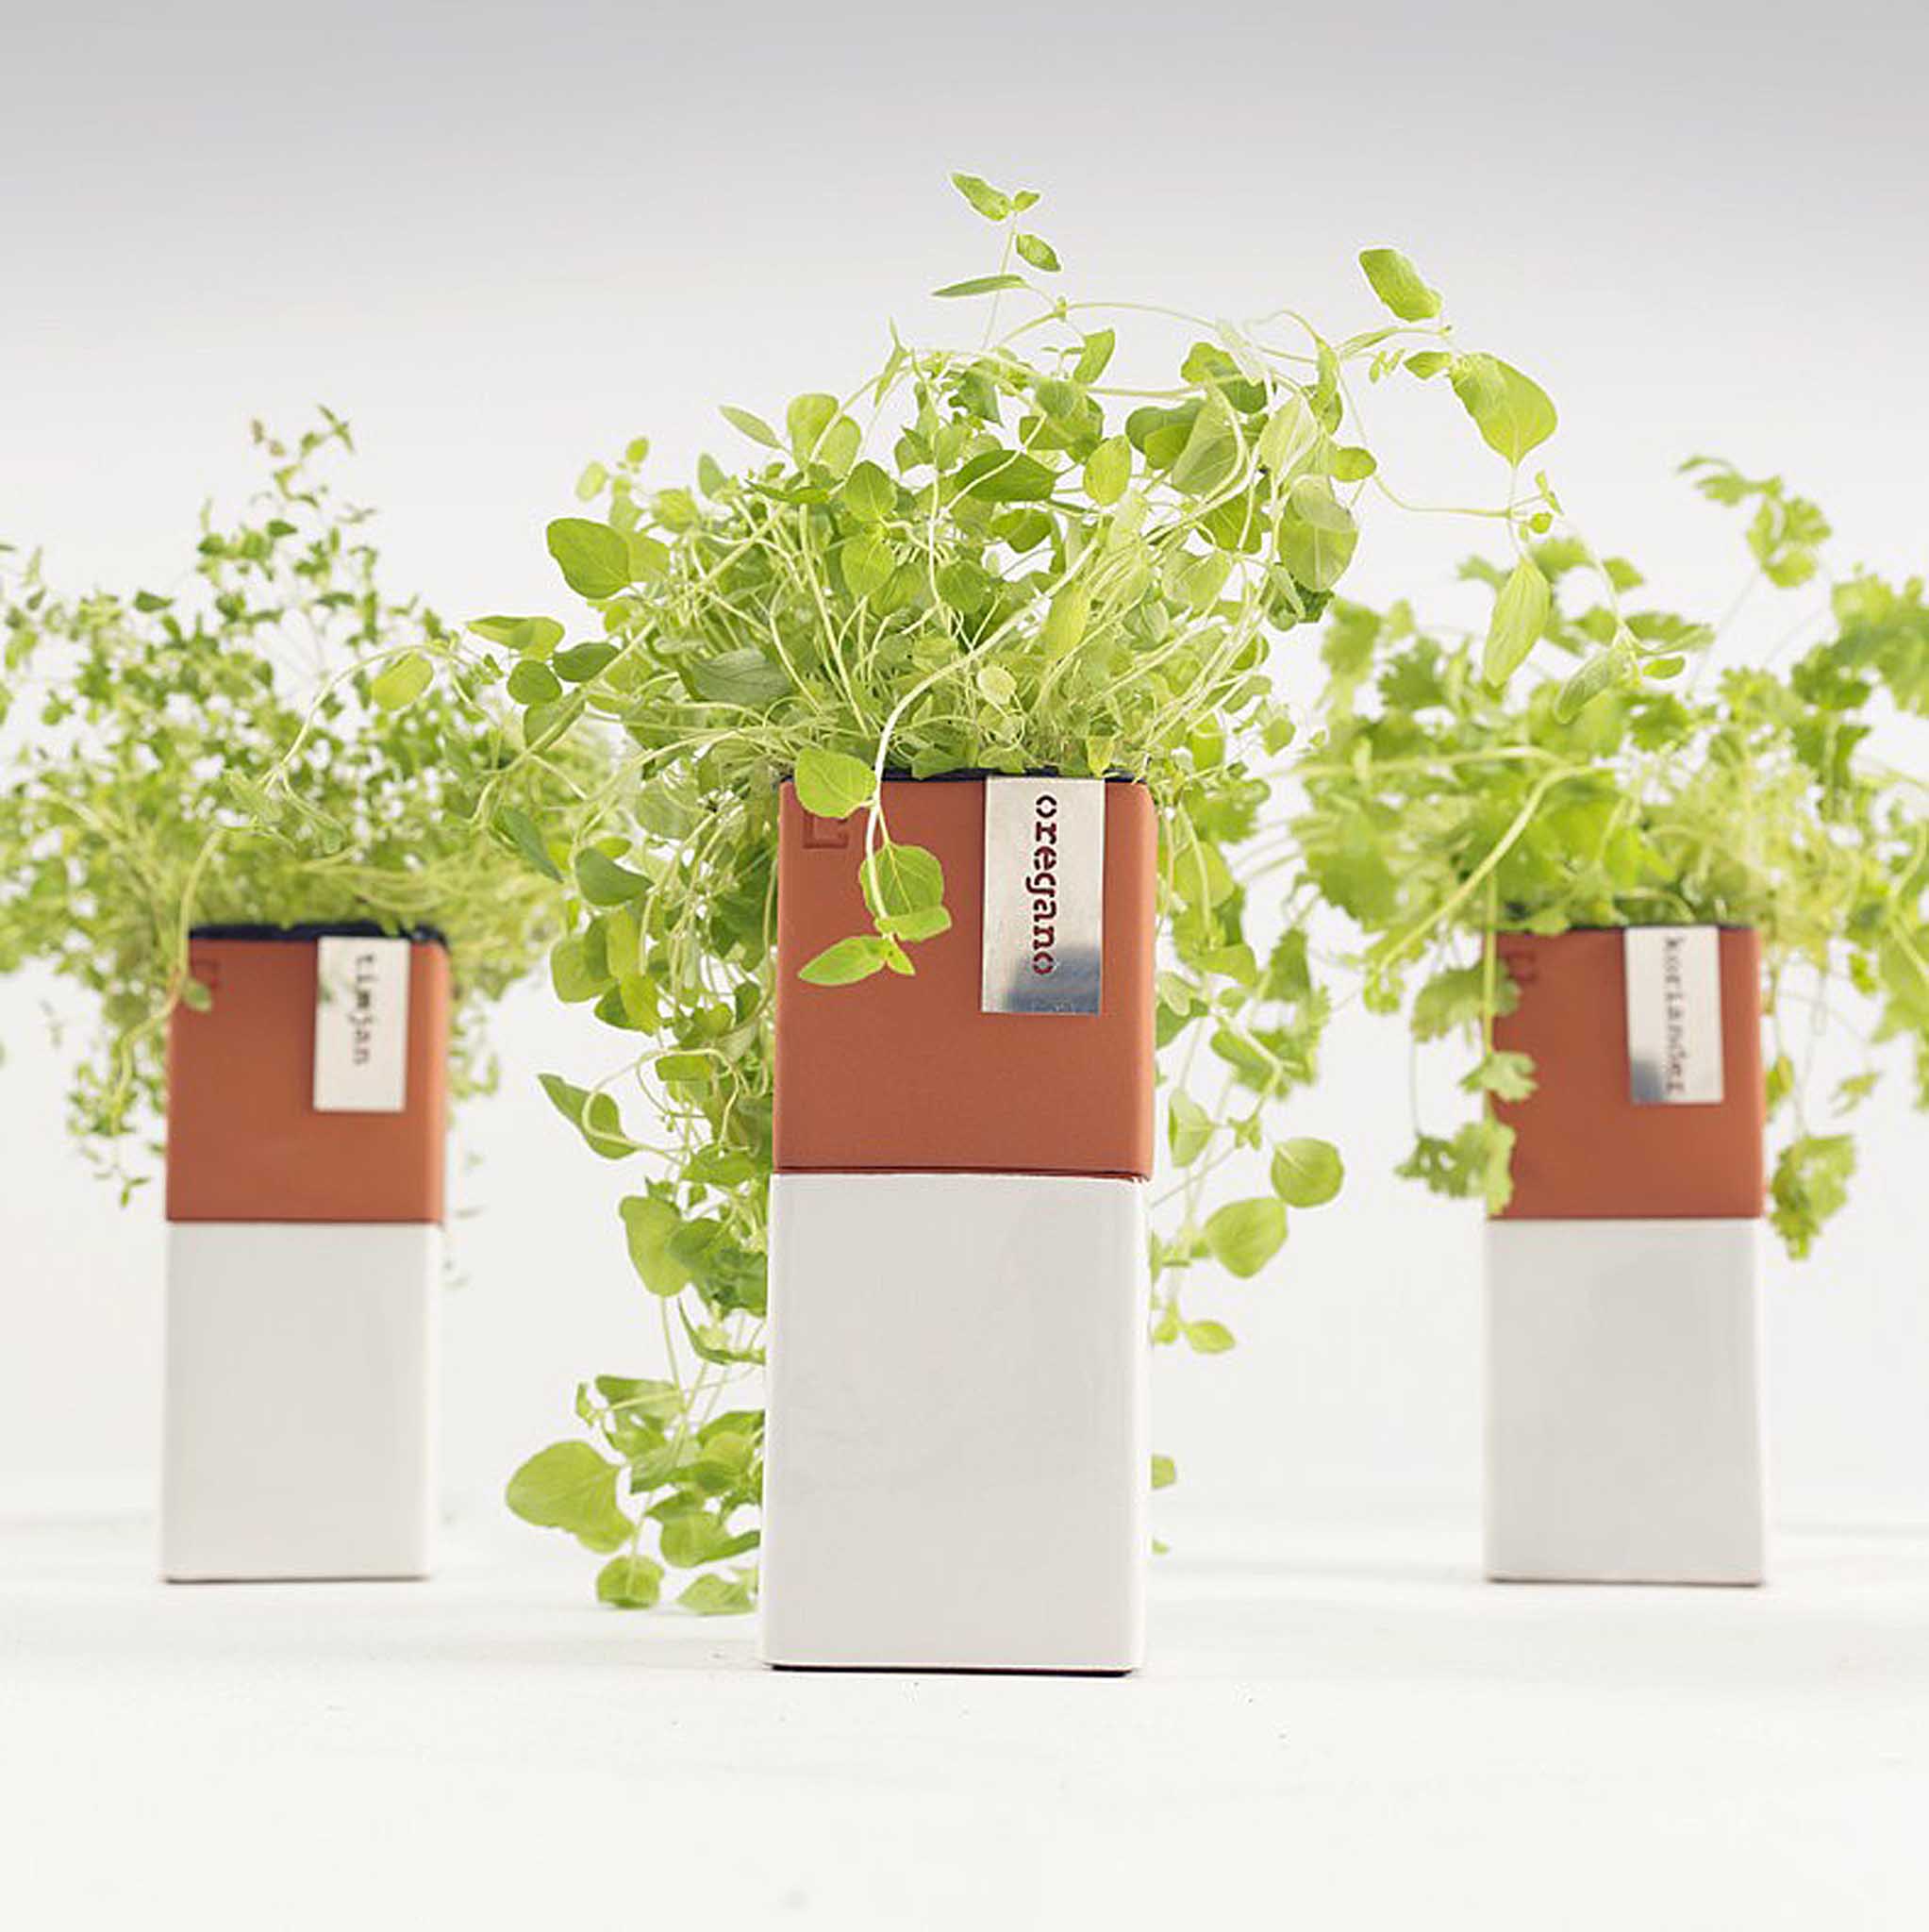 Evergreen Herb Pot is a sleek double-tiered planter that combines a modern look with a modern idea: a self-watering system.